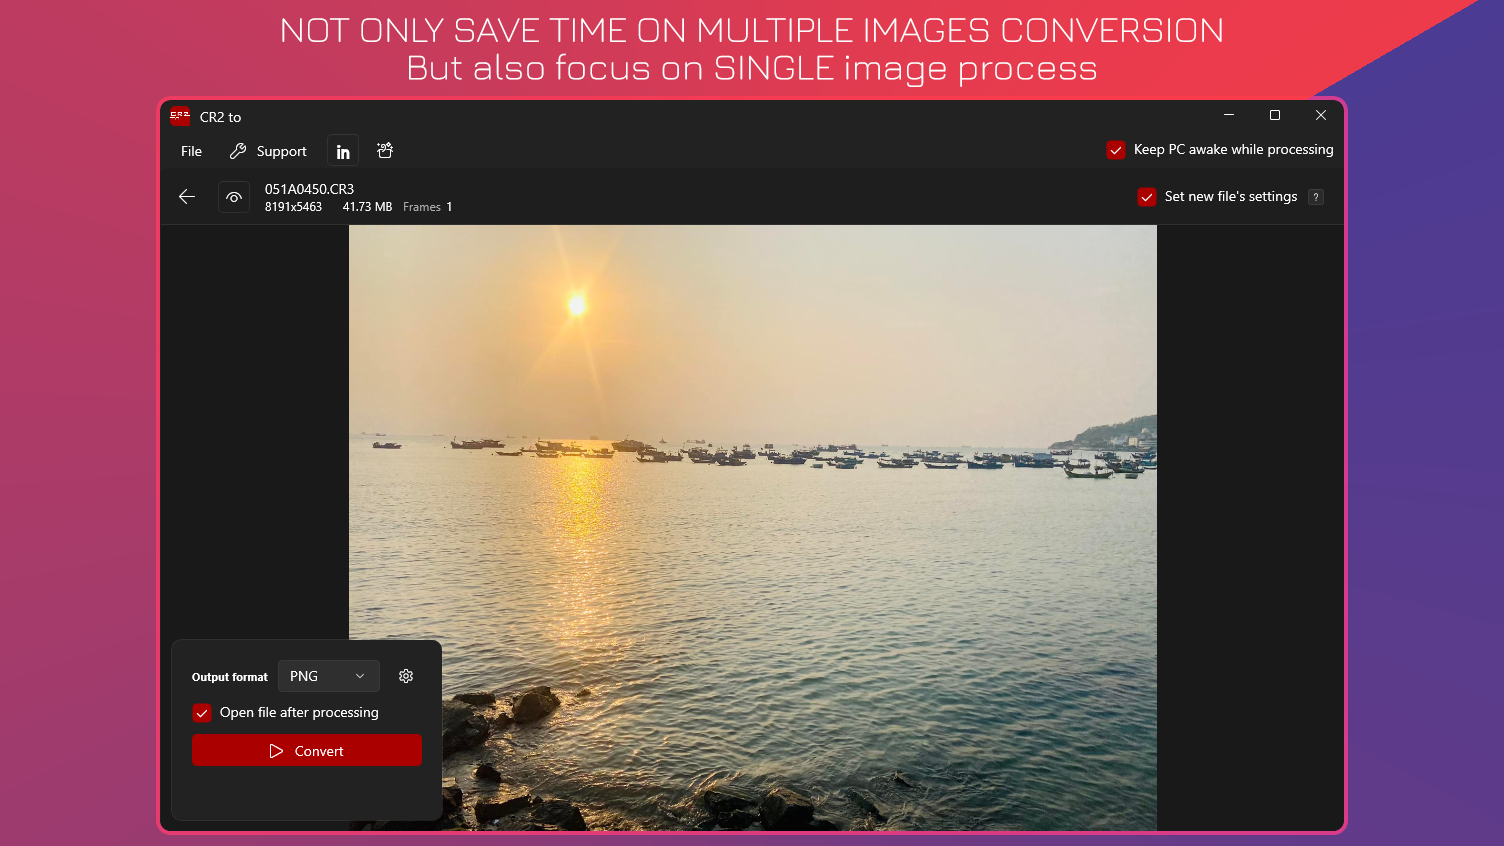 Not Only Save Time in Multiple Images Conversion - But also focus on single image process.